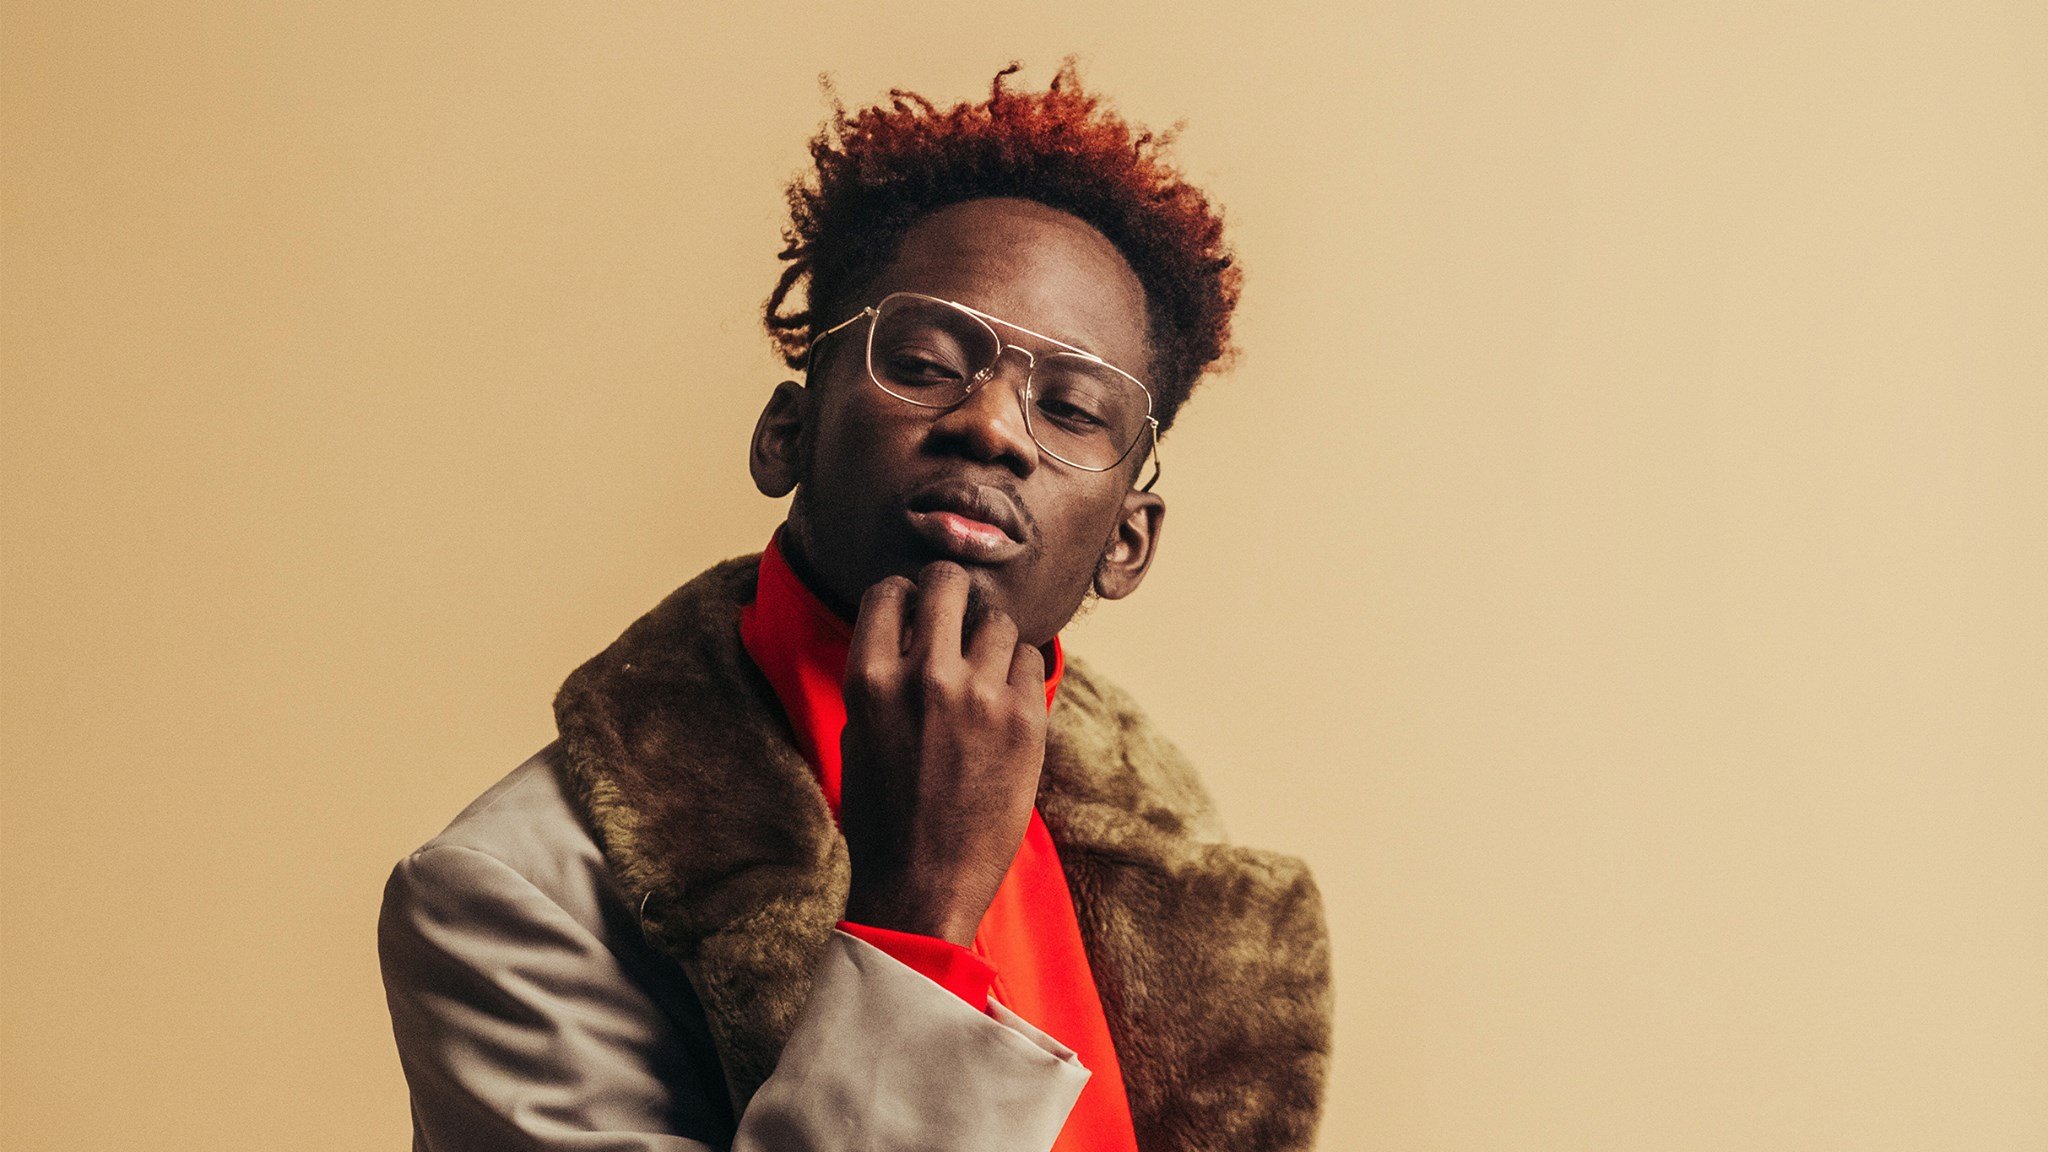 Mr Eazi Speaks Out: Embracing the Haters and Celebrating Uniqueness